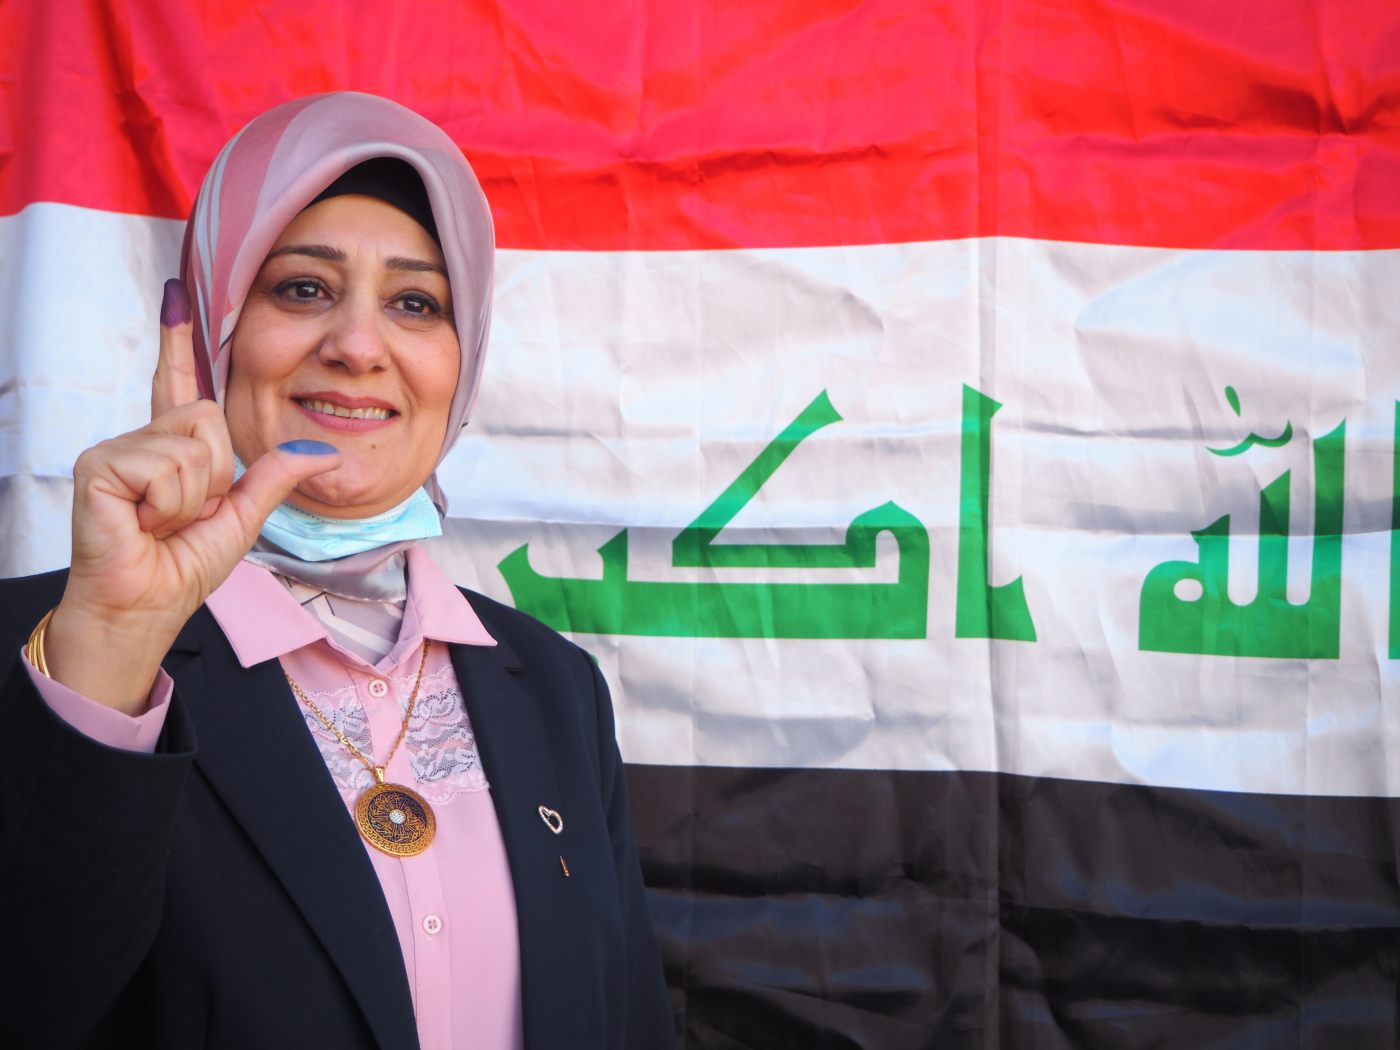 Candidate Sawsan Jadou shows ink-stained fingers after voting in Kirkuk on 10 October 2021 (MEE/Tom Westcott)